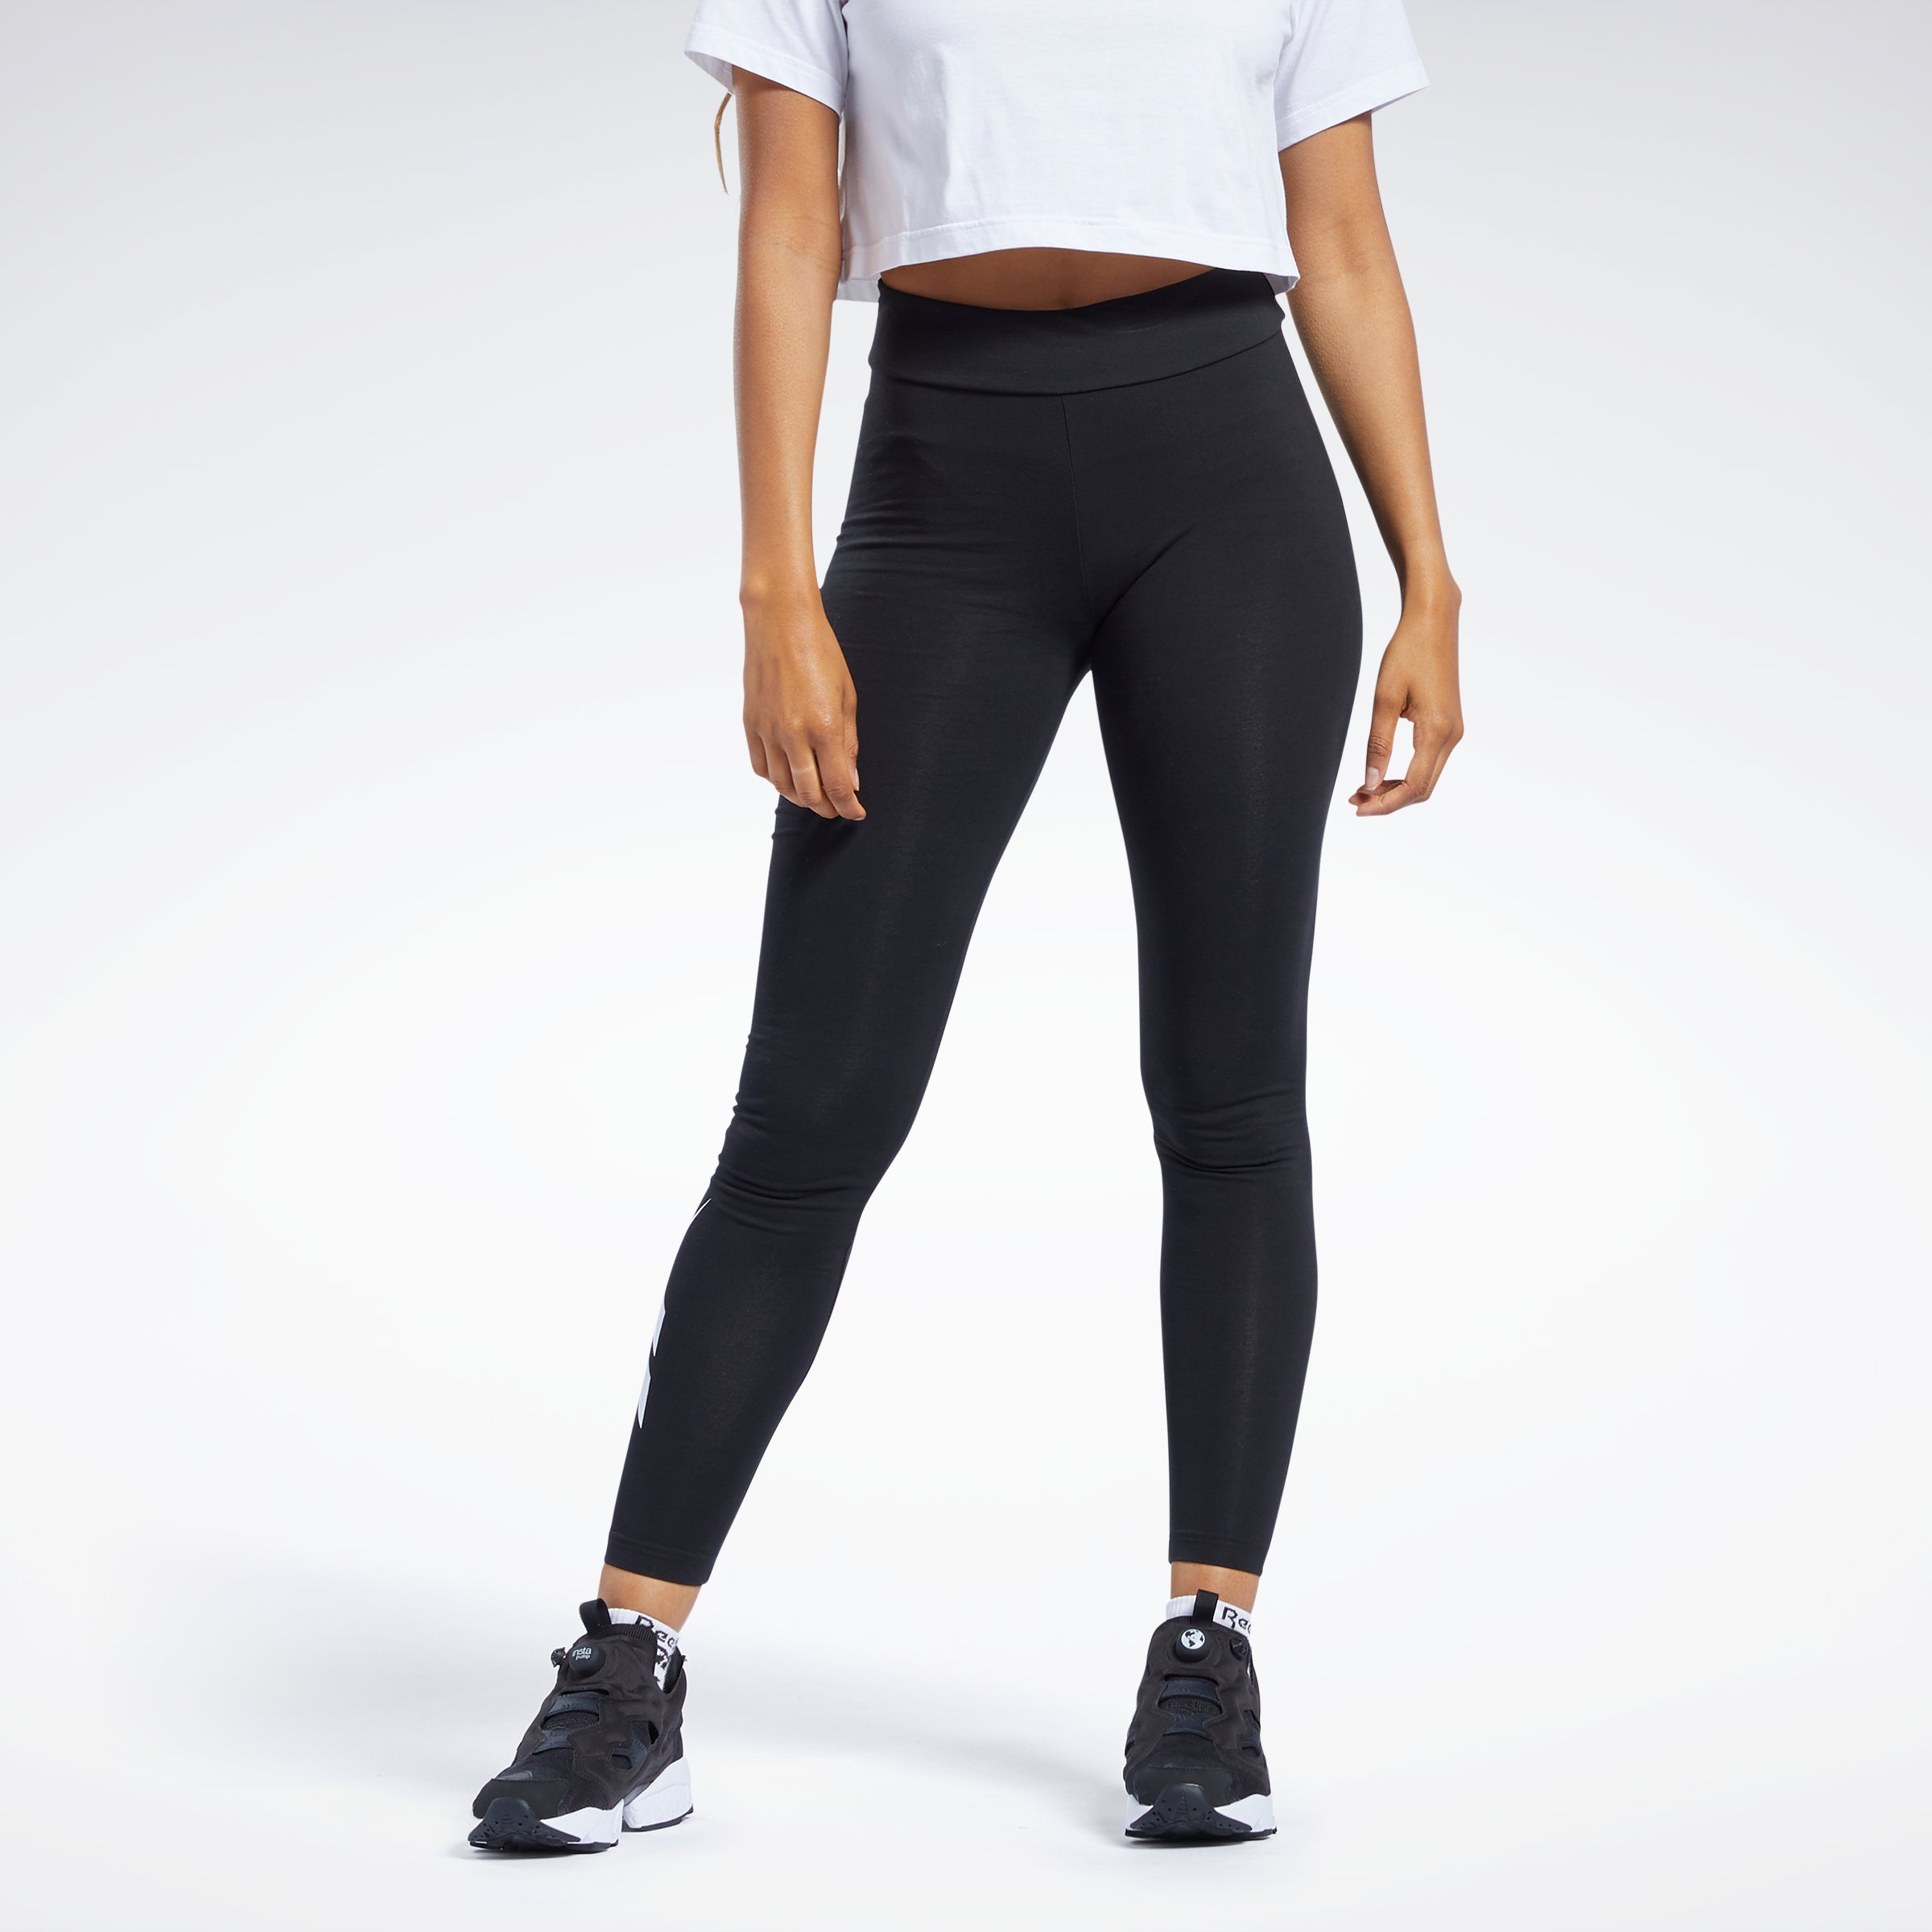 Performance Women's Cotton-spandex With Side Pockets Legging In Black